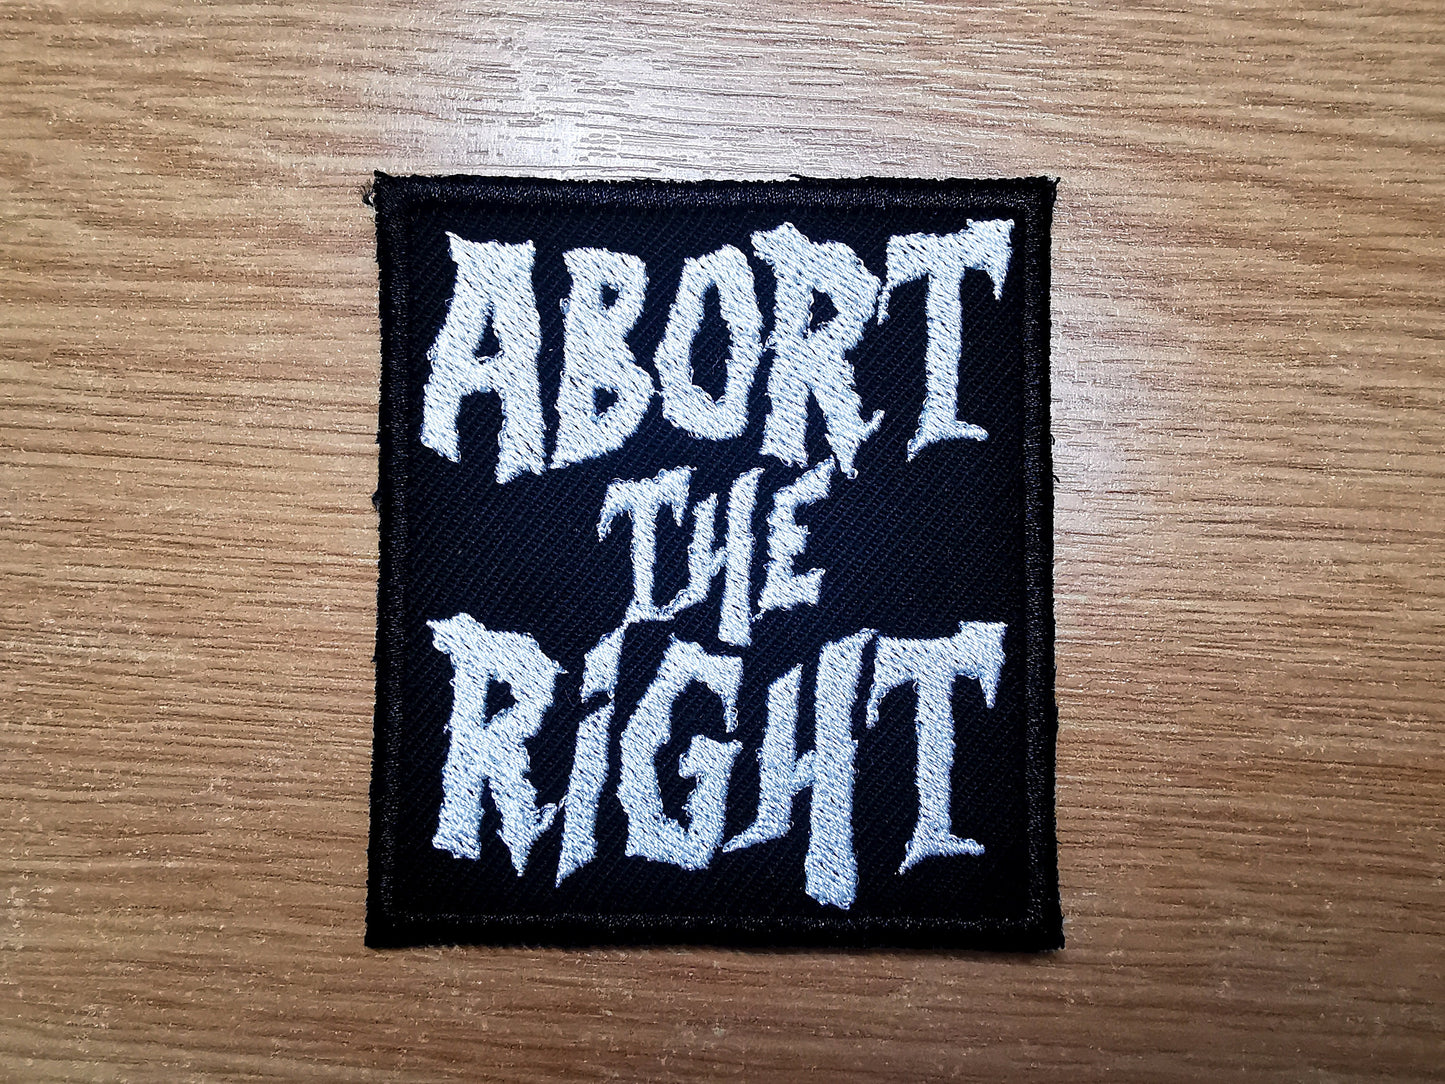 Abort The Right Pro Choice Feminist Embroidered Iron On Patch Collection Abortion Politics Punk